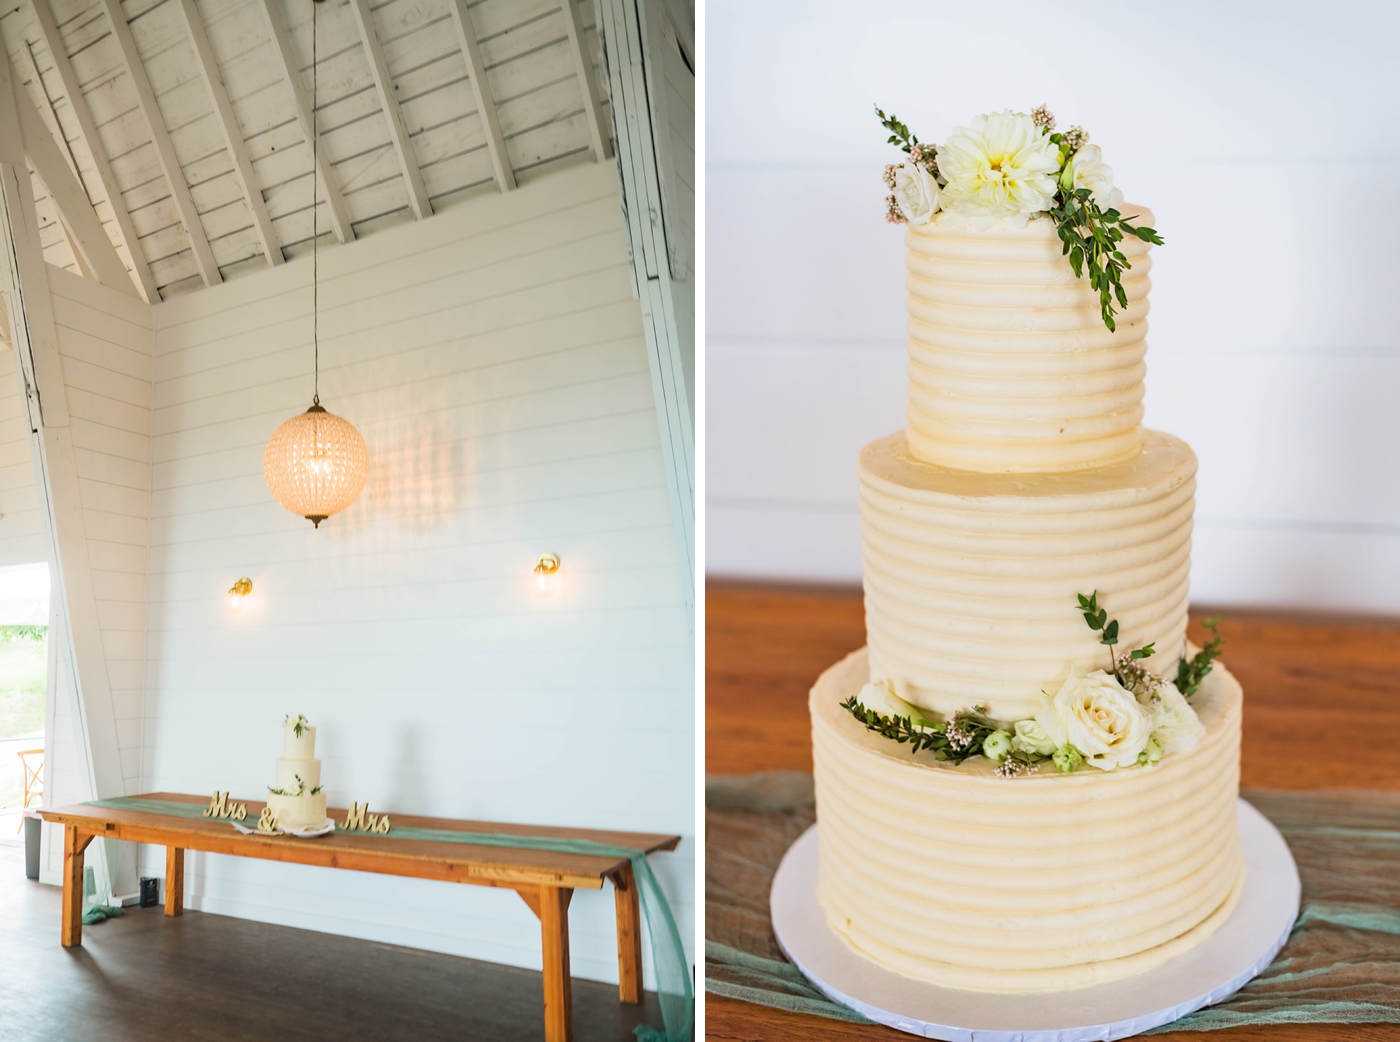 Cake with ribbed buttercream icing, cream florals, and greenery for a spring wedding